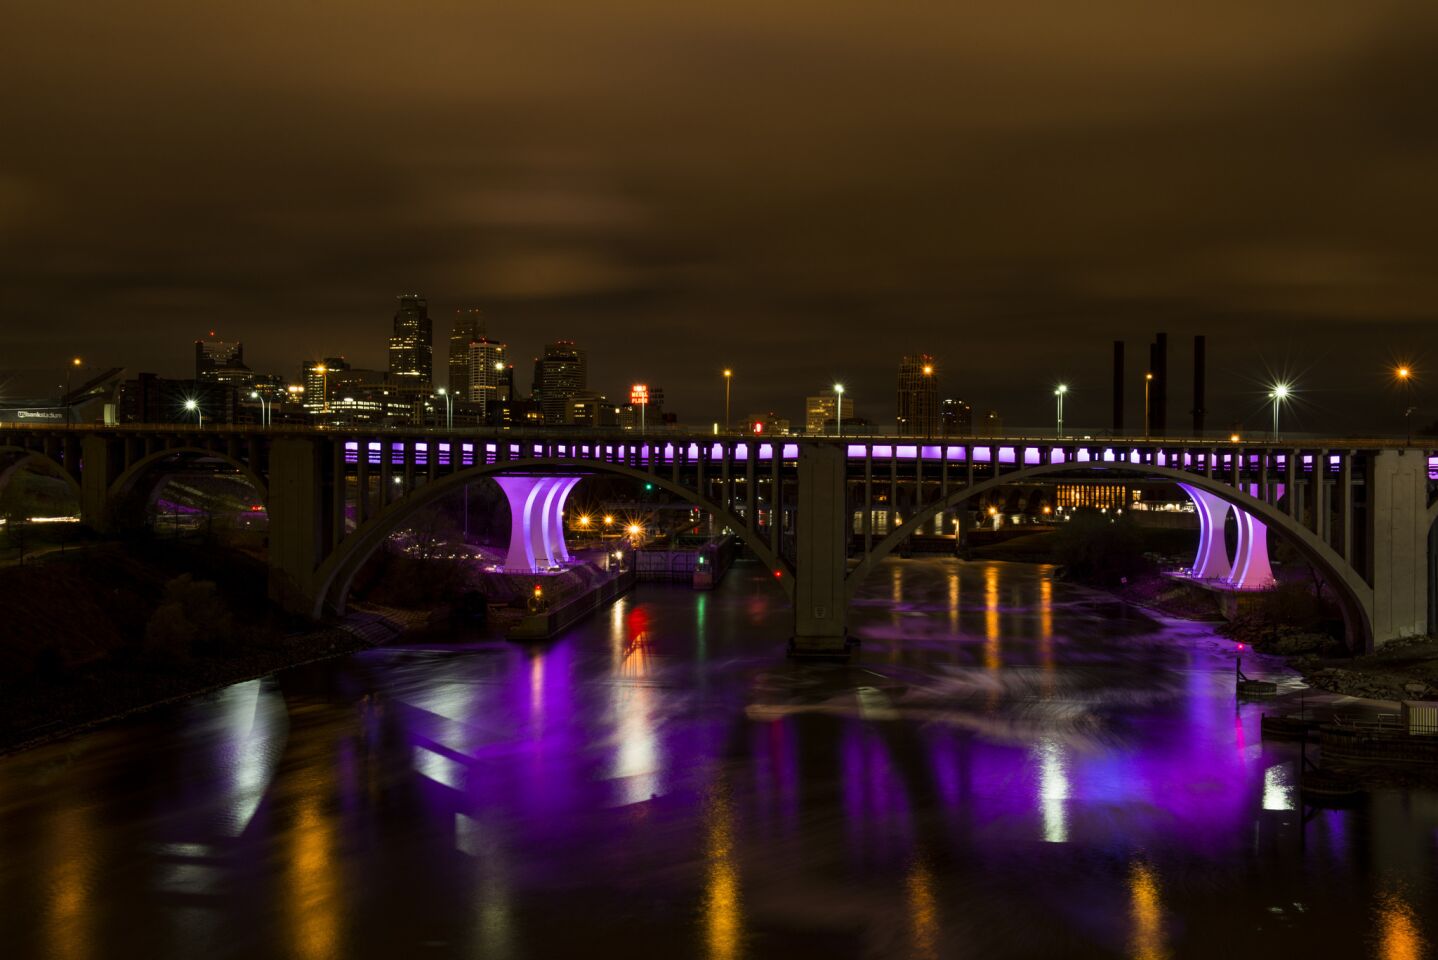 The 35W bridge lit in purple to commemorate the life of Prince on in Minneapolis, MN.